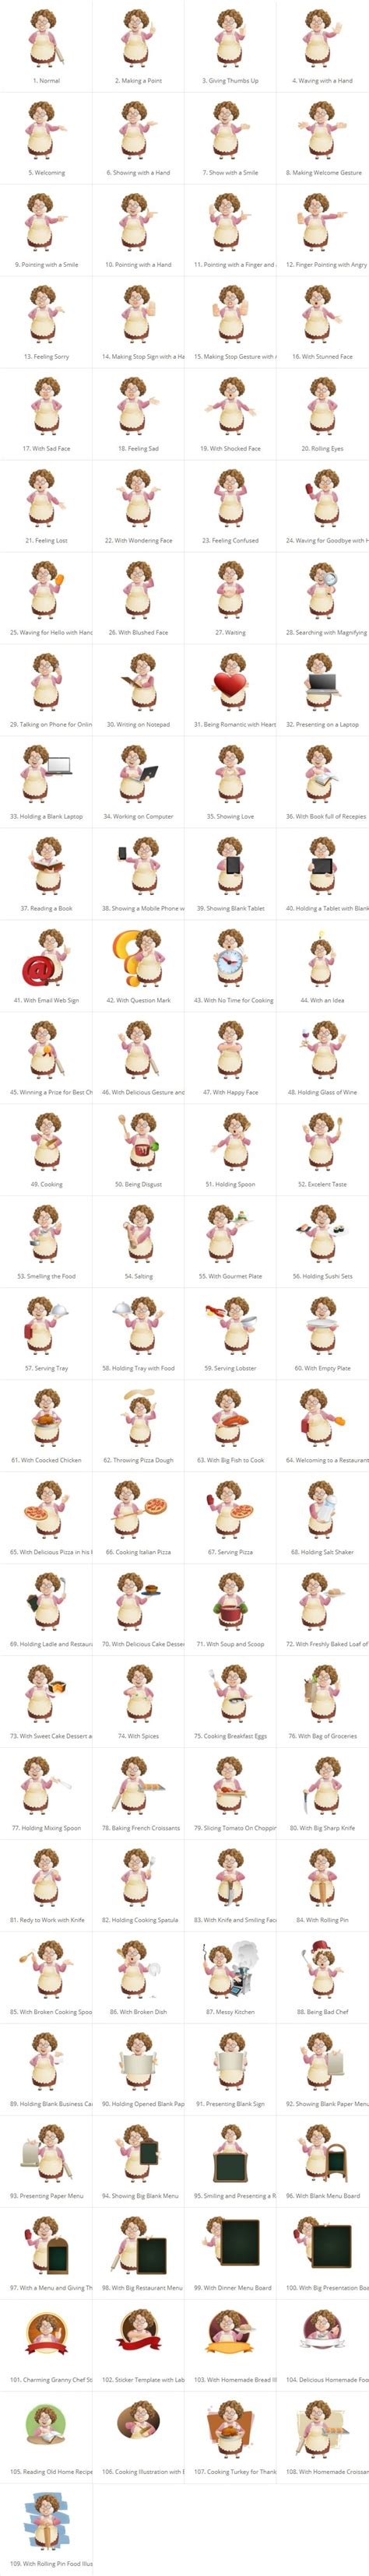 Granny Five Course Meal 112 Action Poses Toon Characters